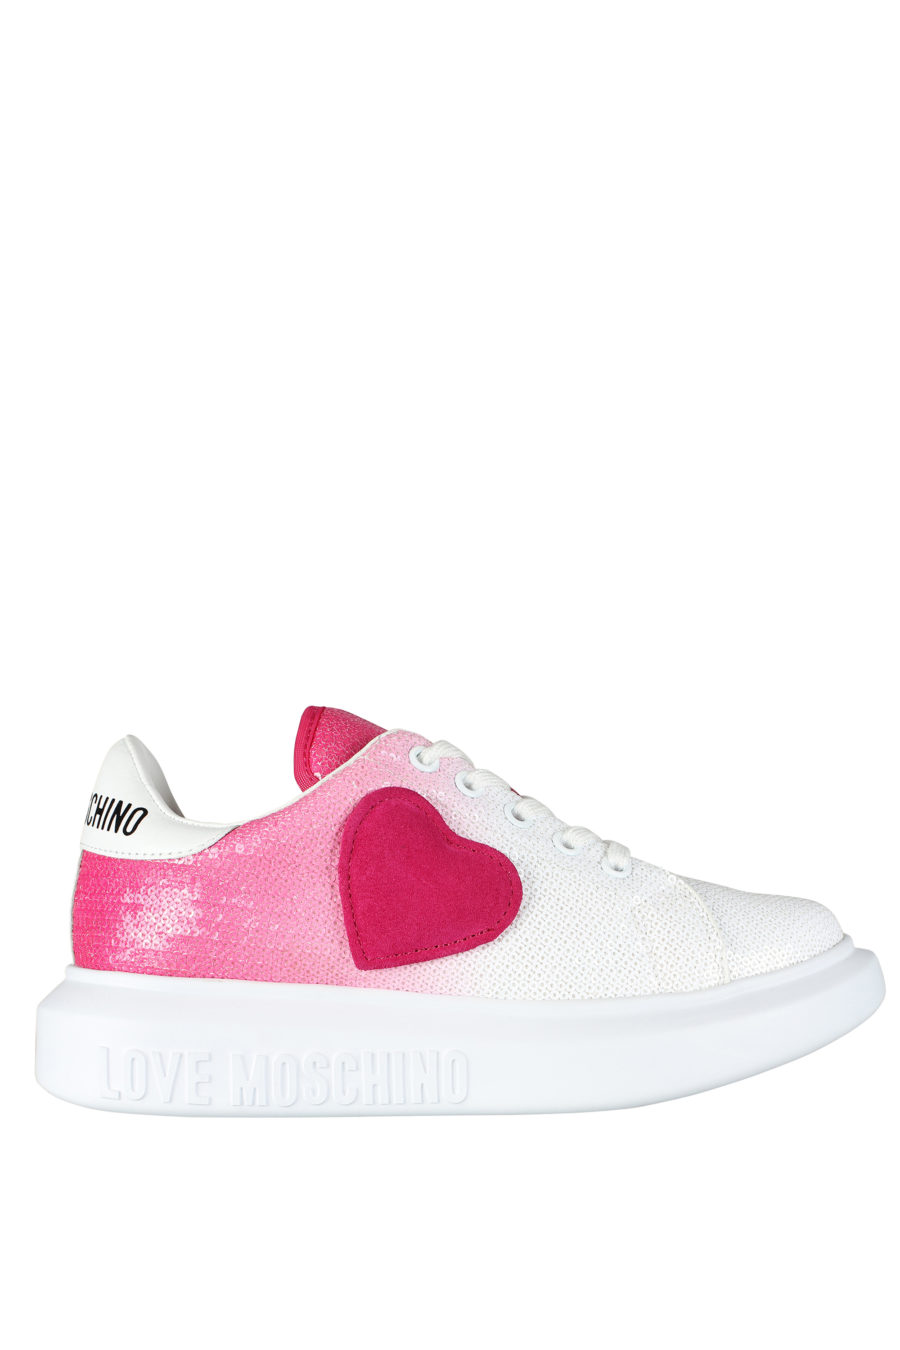 White trainers with pink gradient and sequins - IMG 5261